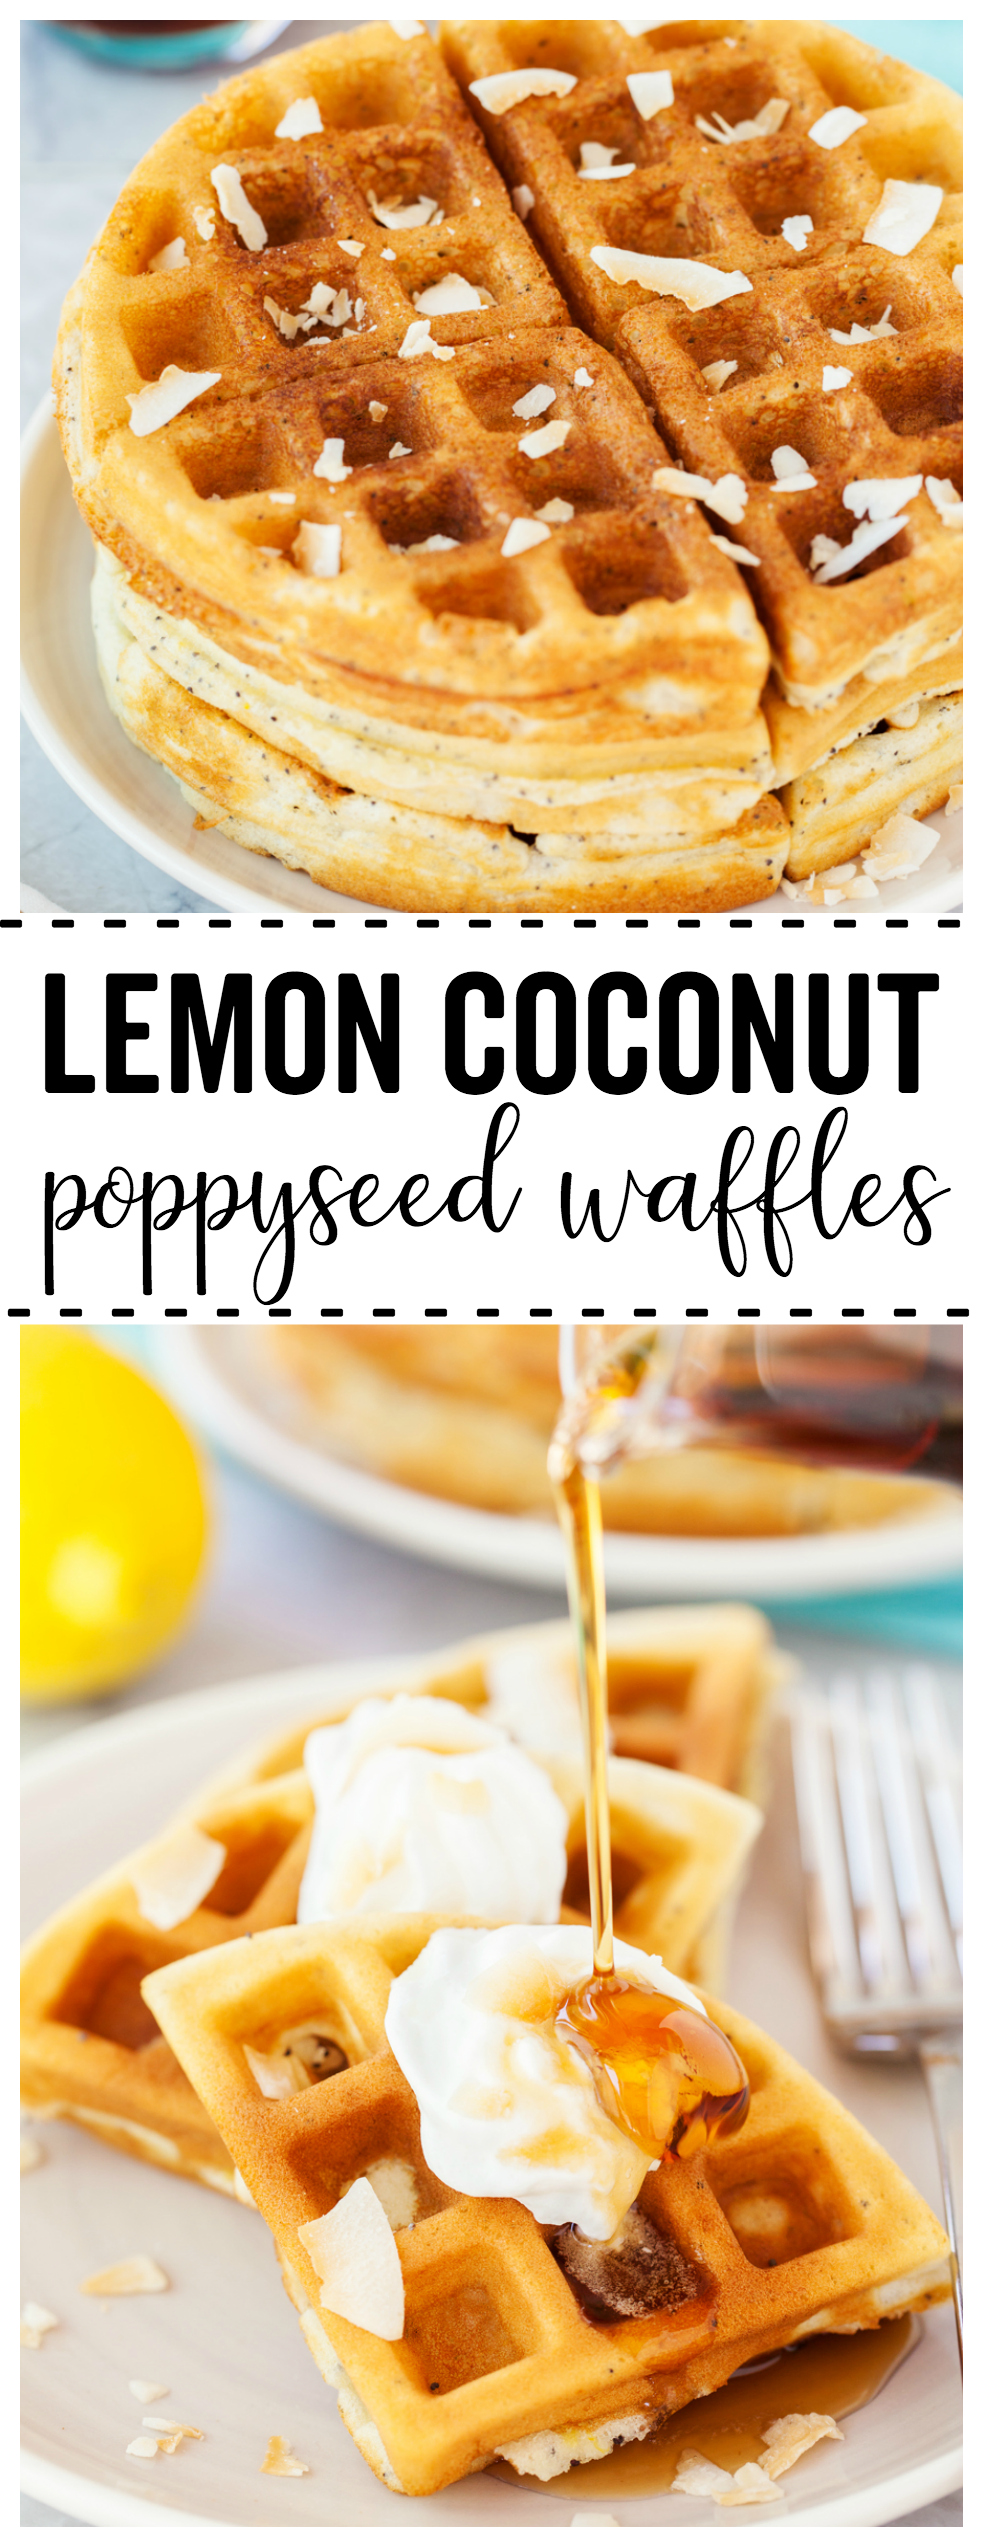  Lemon Coconut Poppyseed Waffles: the perfect blend of sweetness and lemon flavor! These waffles are great for a family breakfast or to serve at a ladies brunch!